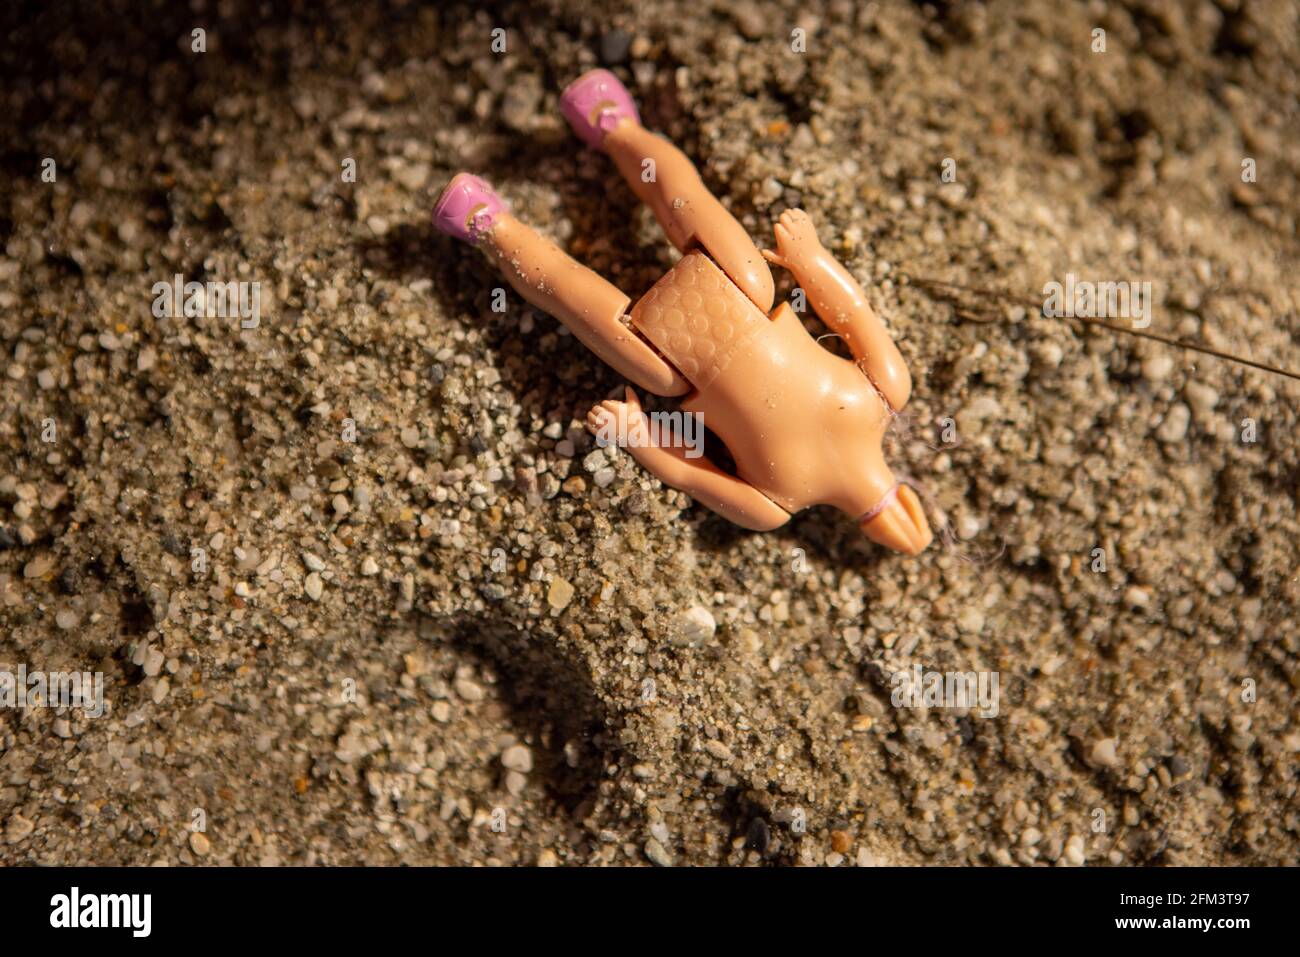 Abandoned Headless Childs Doll in a Sandpit, South Island, New Zealand Stock Photo